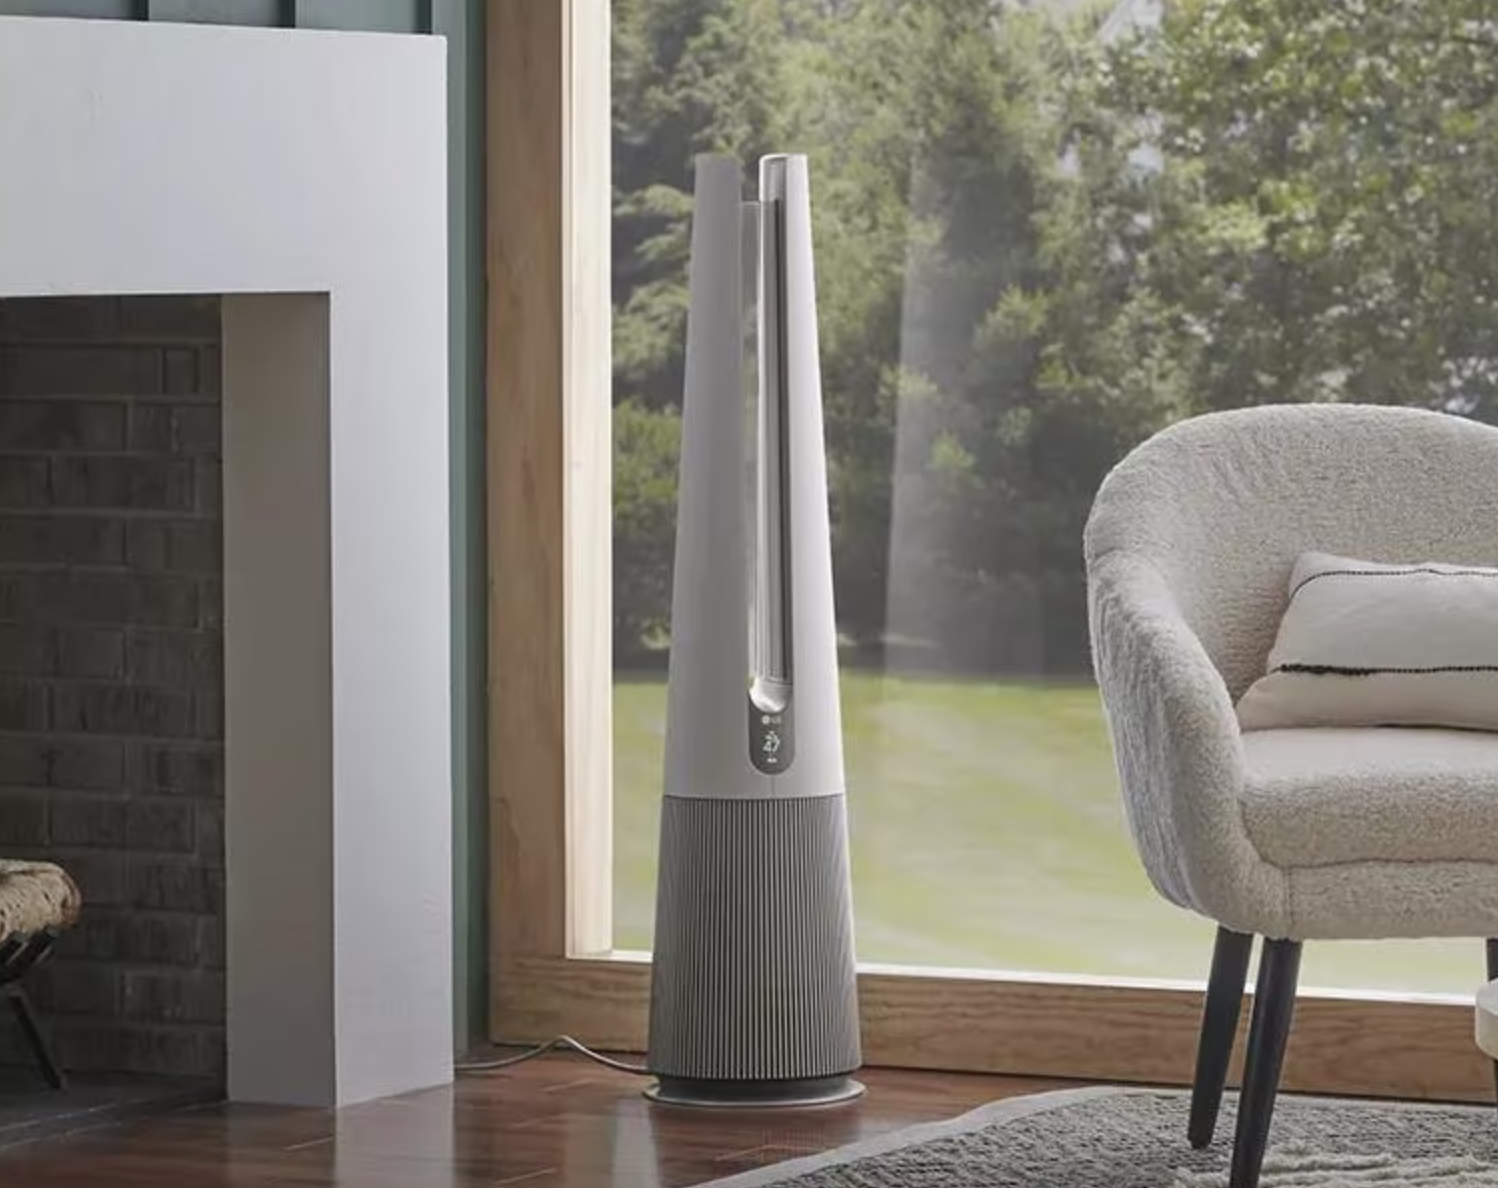 The white, cone-shaped air purifying tower